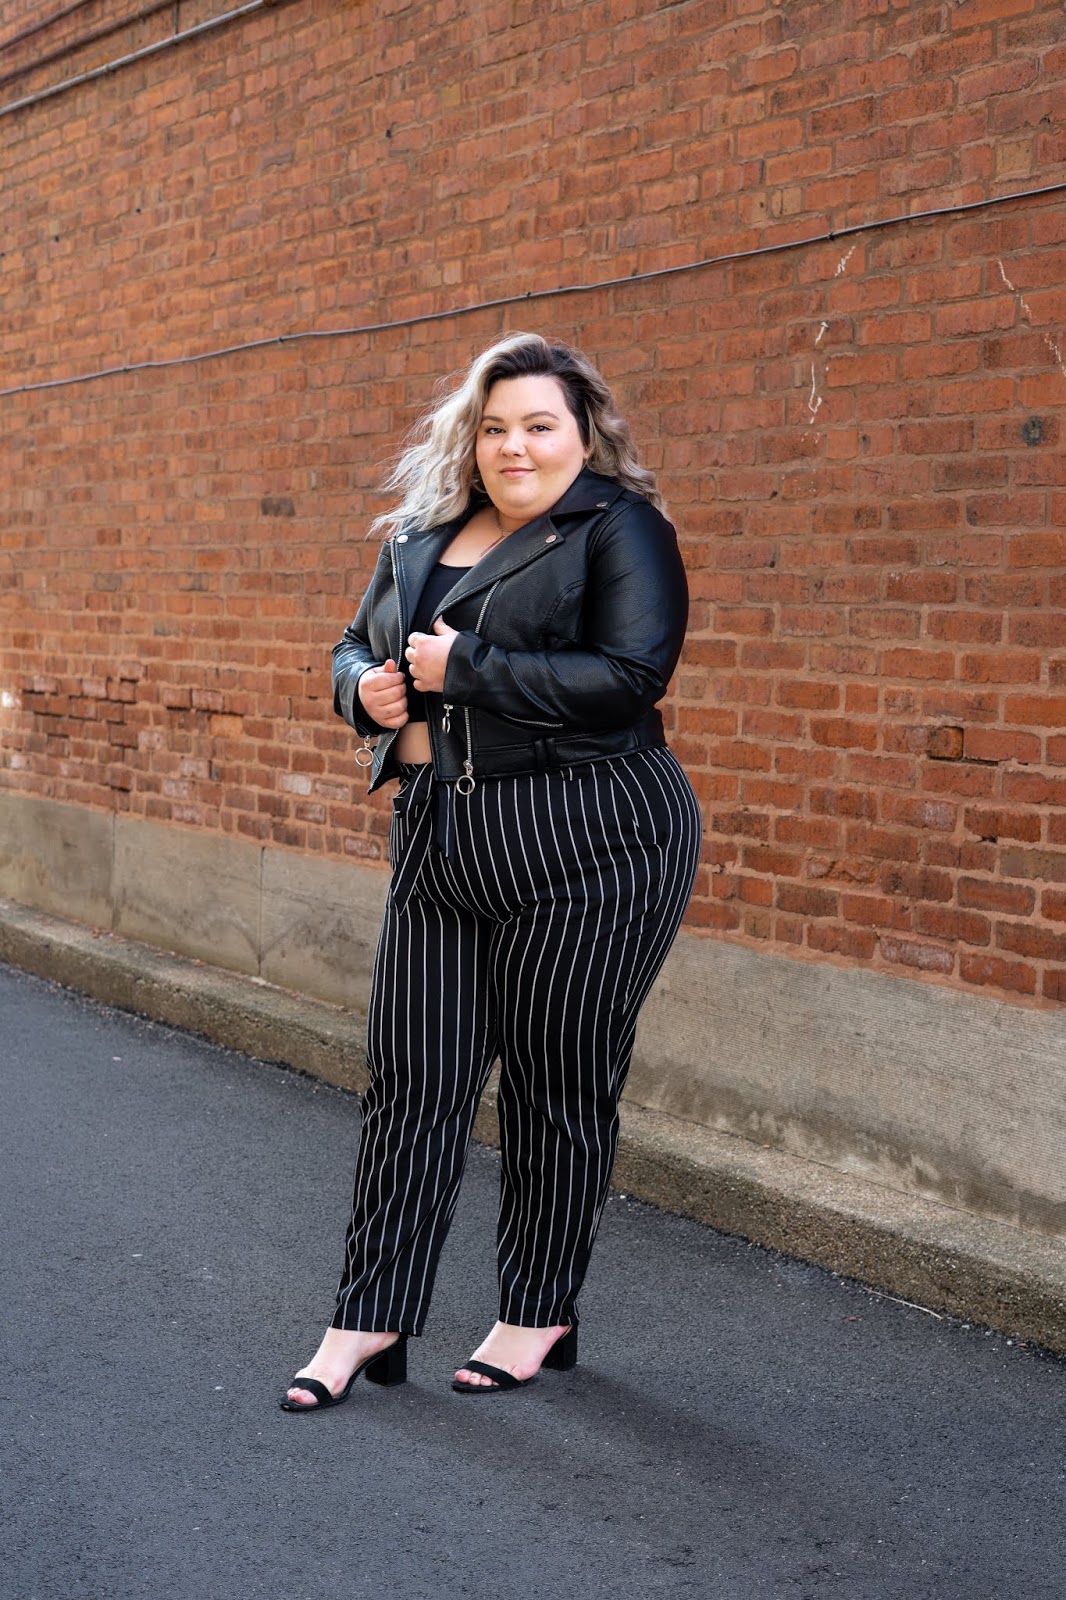 Chicago Plus Size Petite Fashion Blogger, YouTuber, and model Natalie Craig, of Natalie in the City, reviews Fashion Nova's paper bag waist pants and cropped tops.